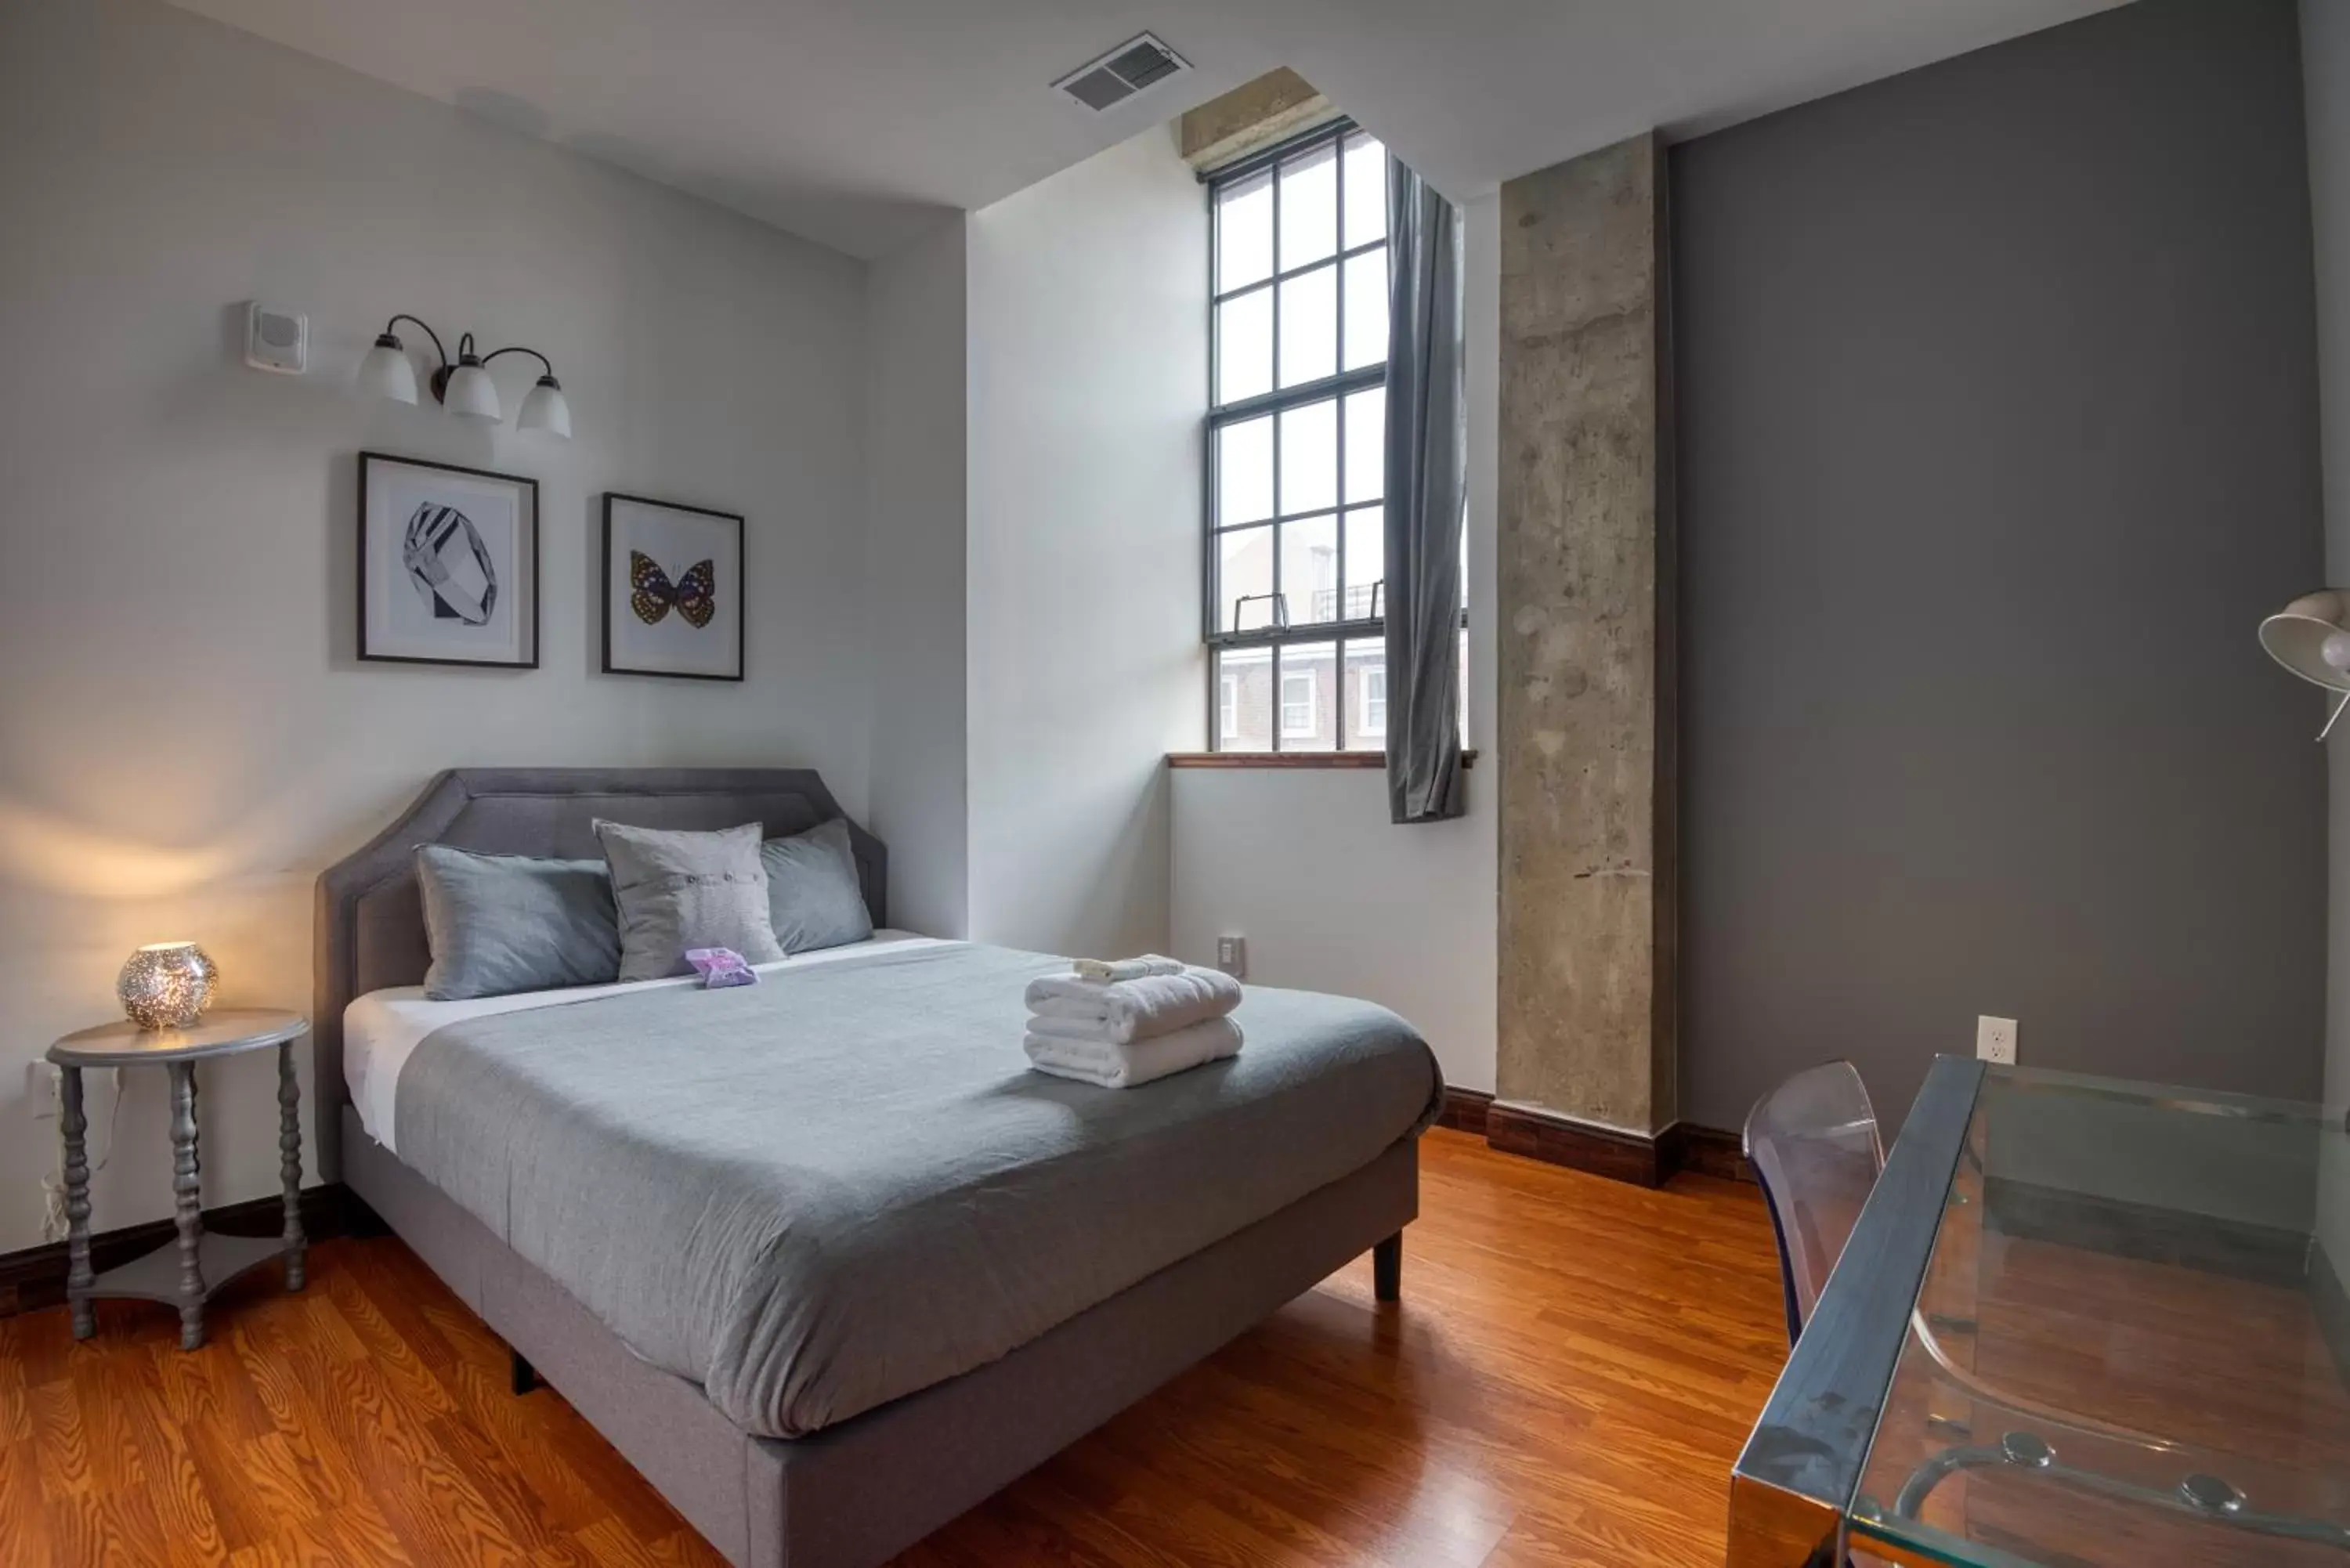 Two-Bedroom Apartment in Sosuite at Independence Lofts - Callowhill